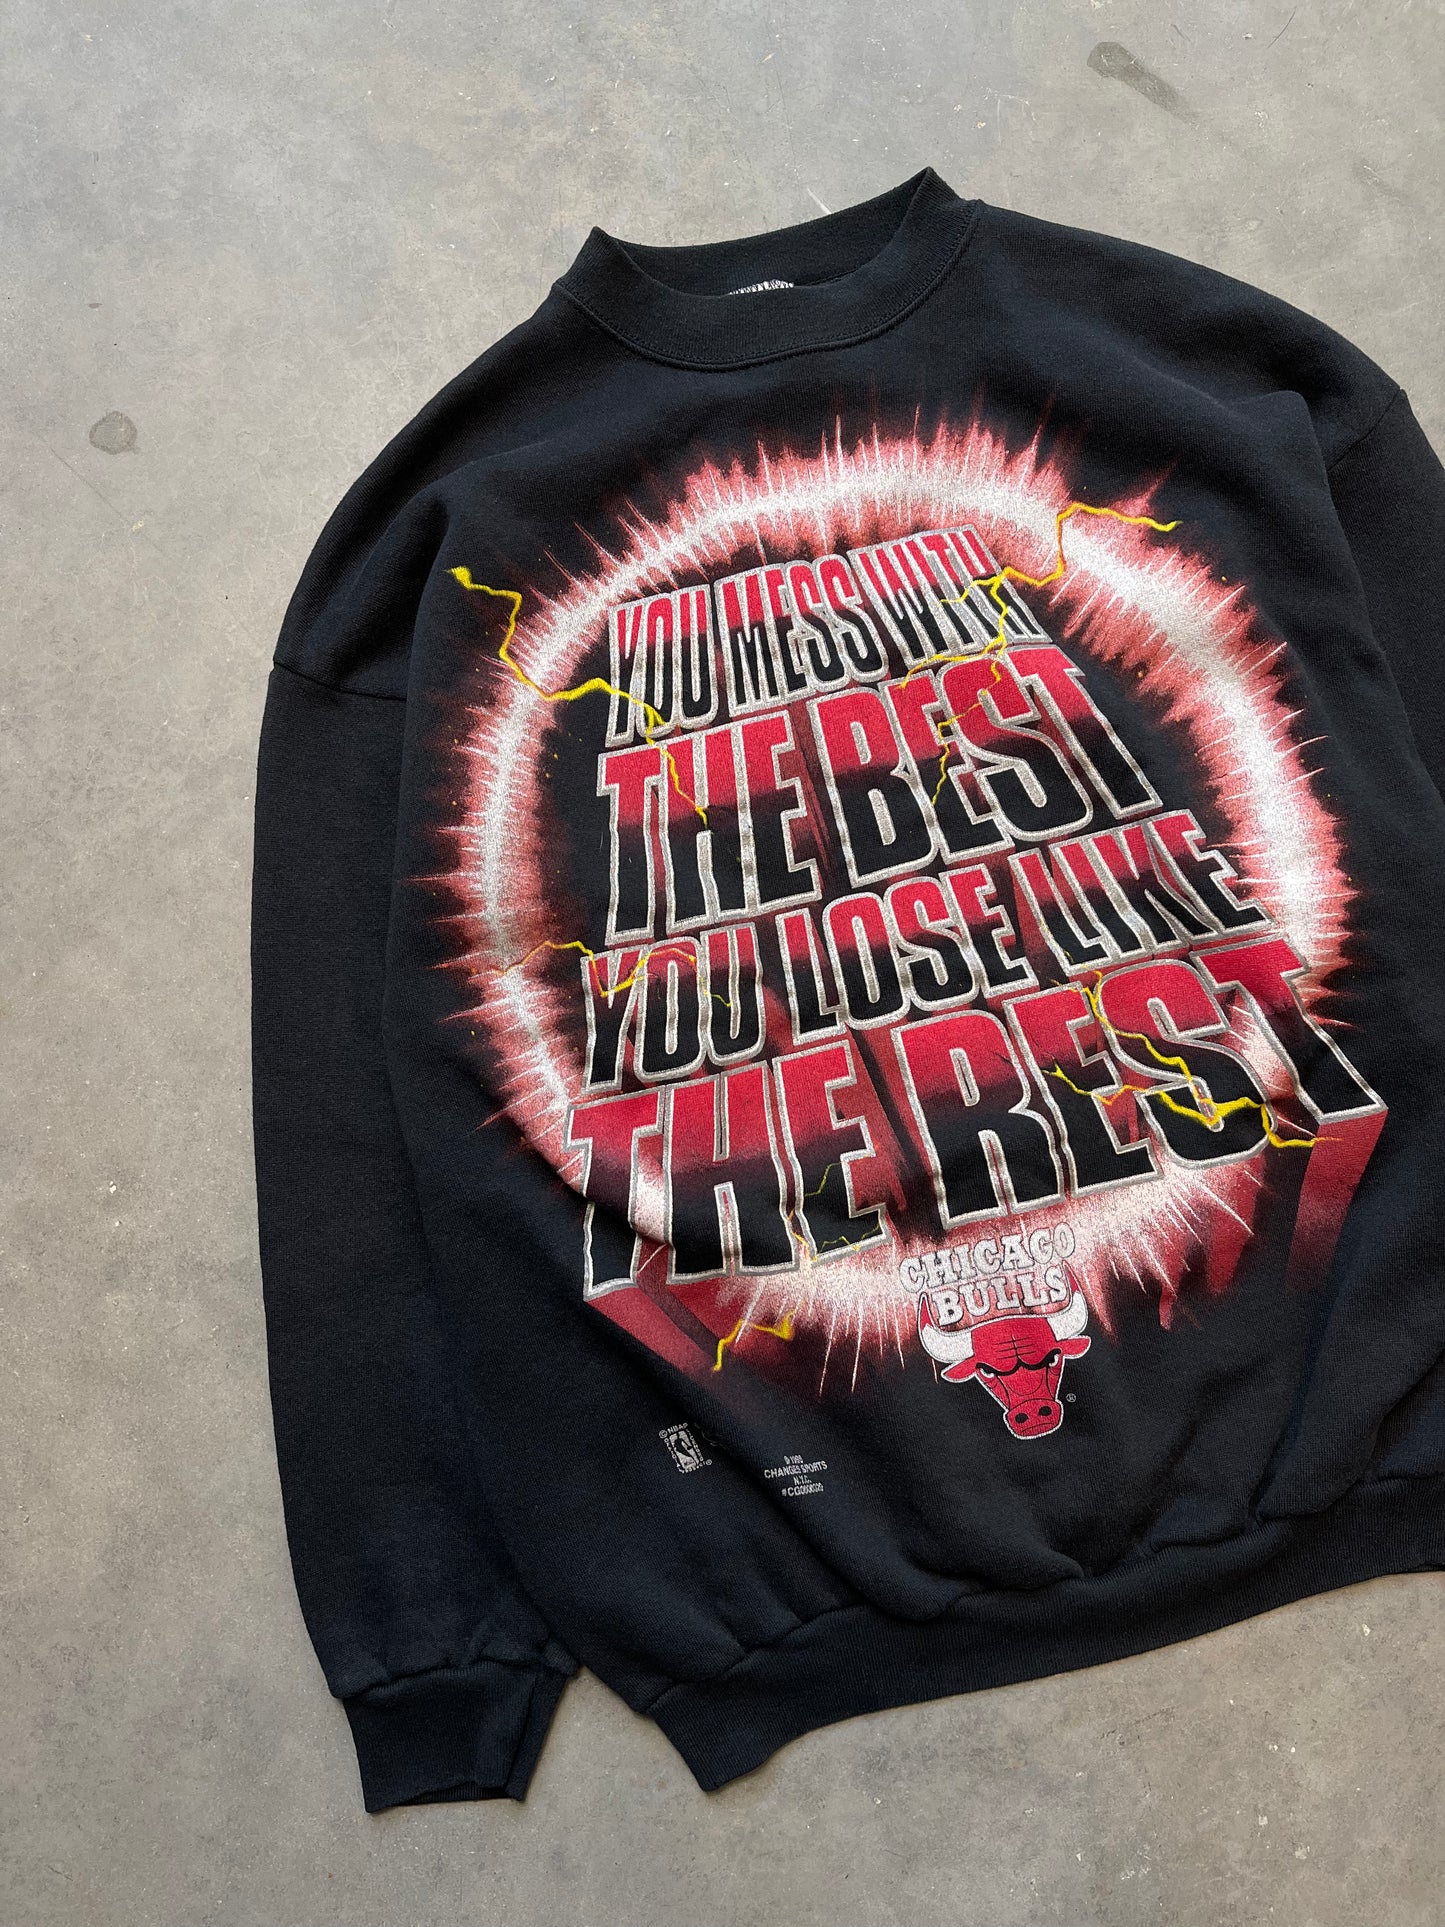 90's Chicago Bulls "Mess With The Best" Lightning Vintage NBA Crewneck (XL)